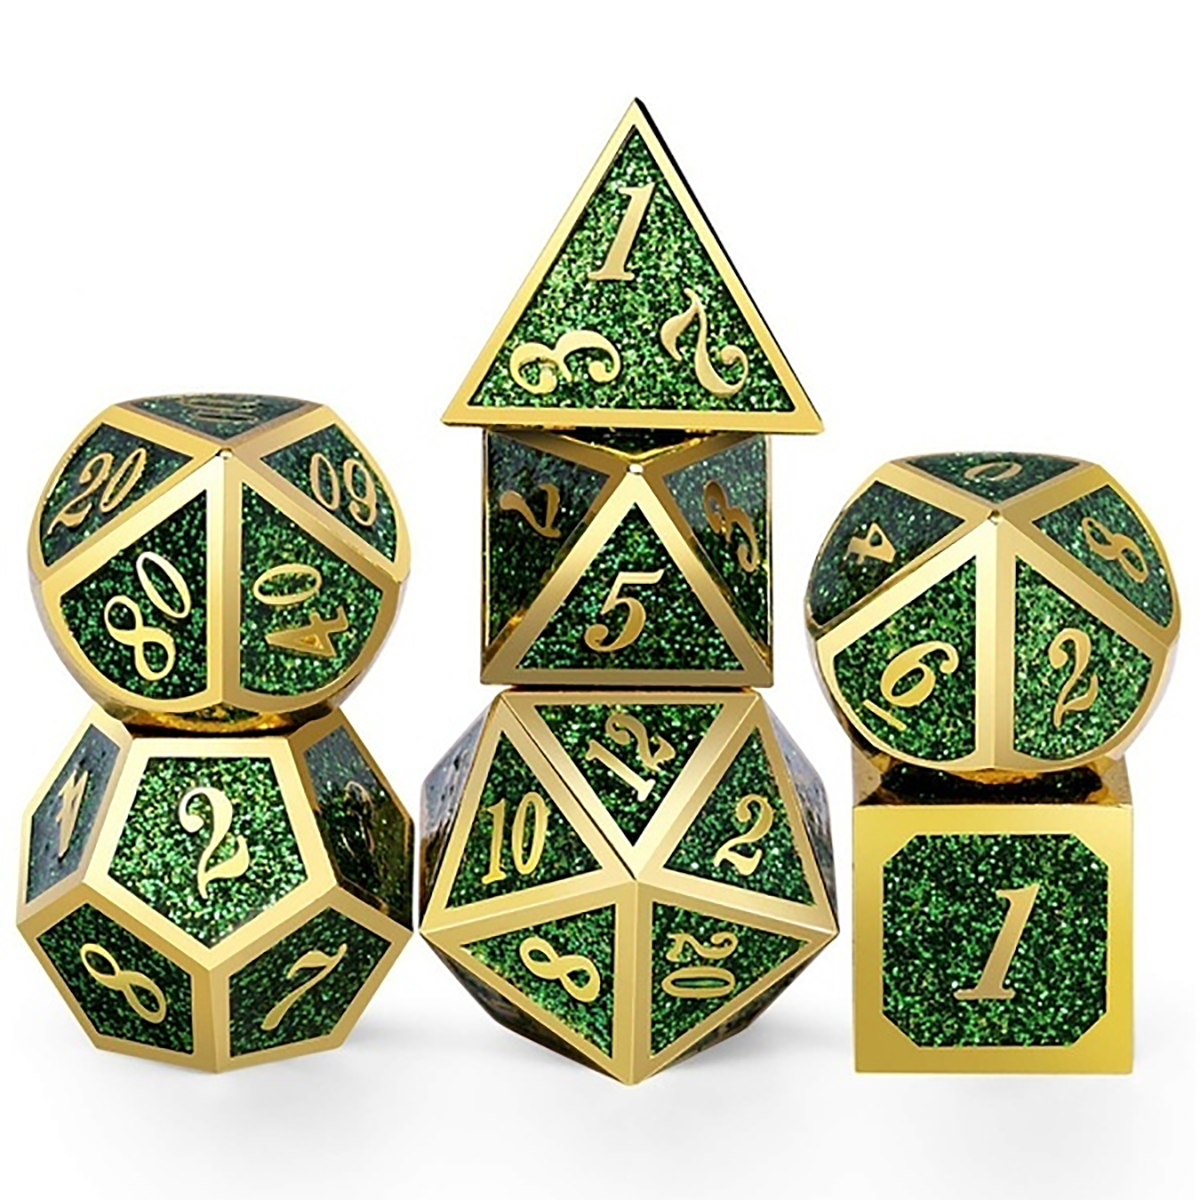 7-PcsSet-Metal-Dice-Set-Role-Playing-Dragons-Table-Board-Game-Toys-With-Cloth-Bag-Bar-Party-Game-Dic-1672532-8